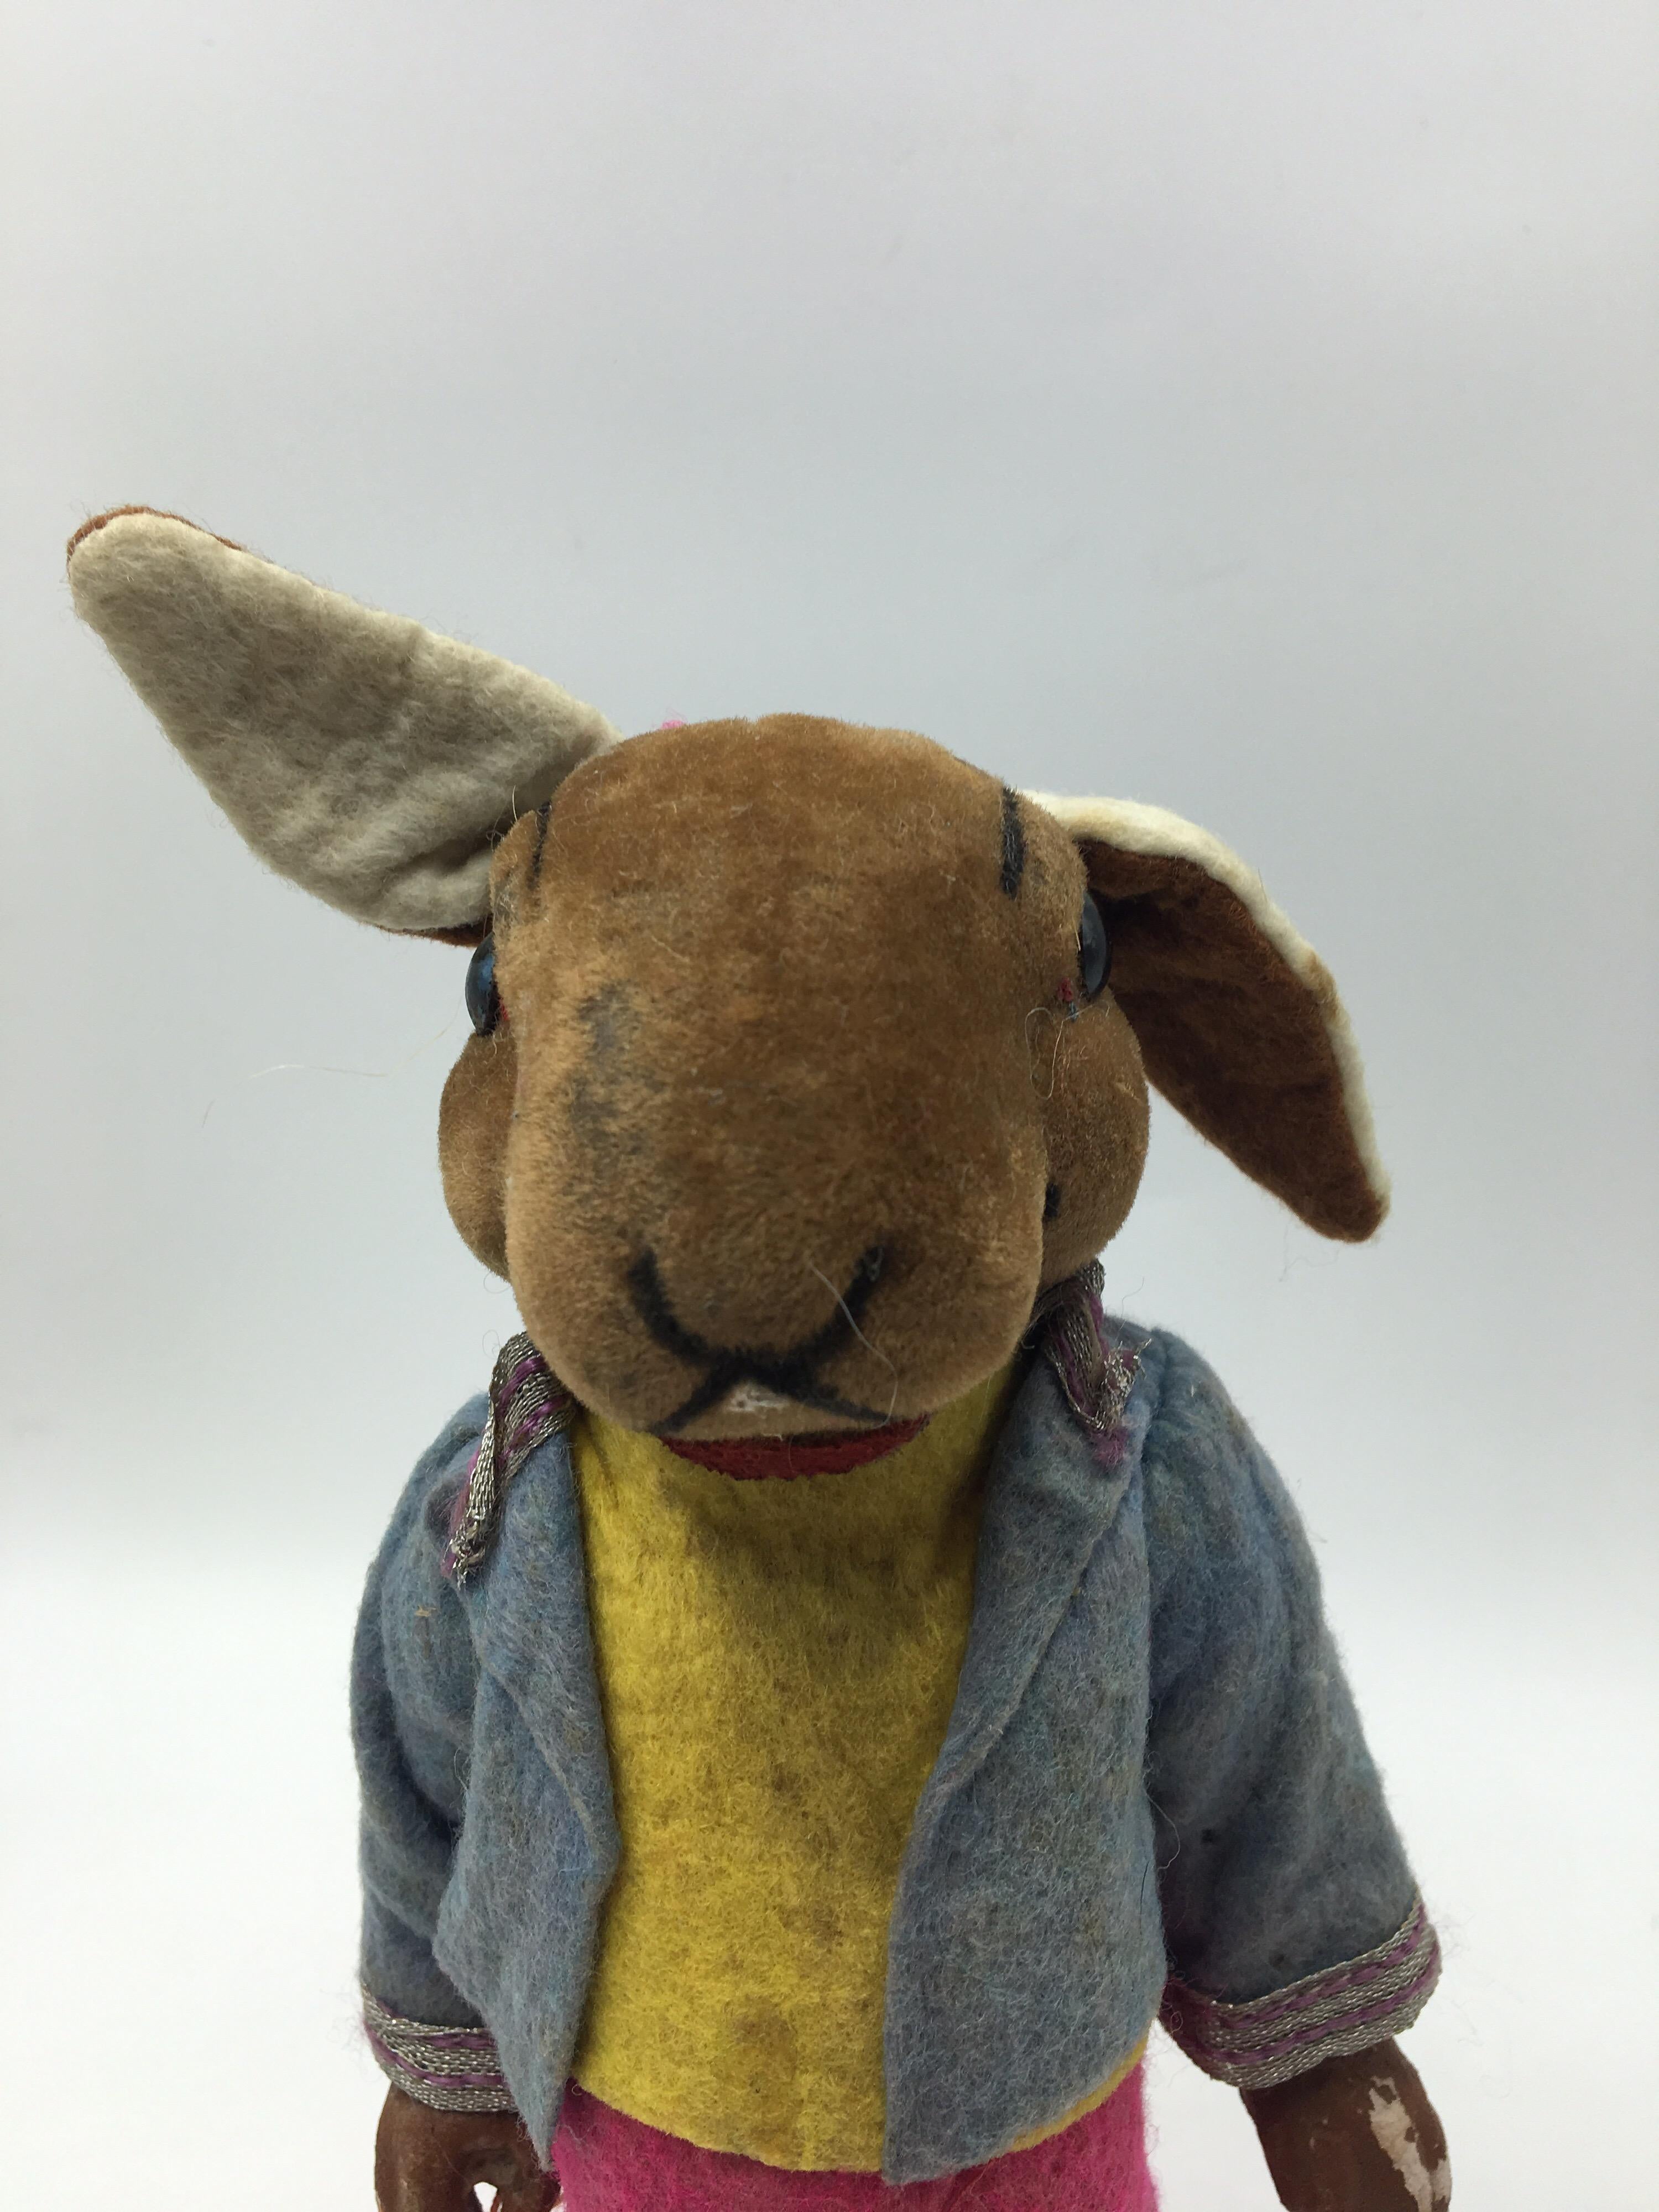 Mid-20th Century Rabbit Toy Made of Textile and Carton, US, 1950s For Sale